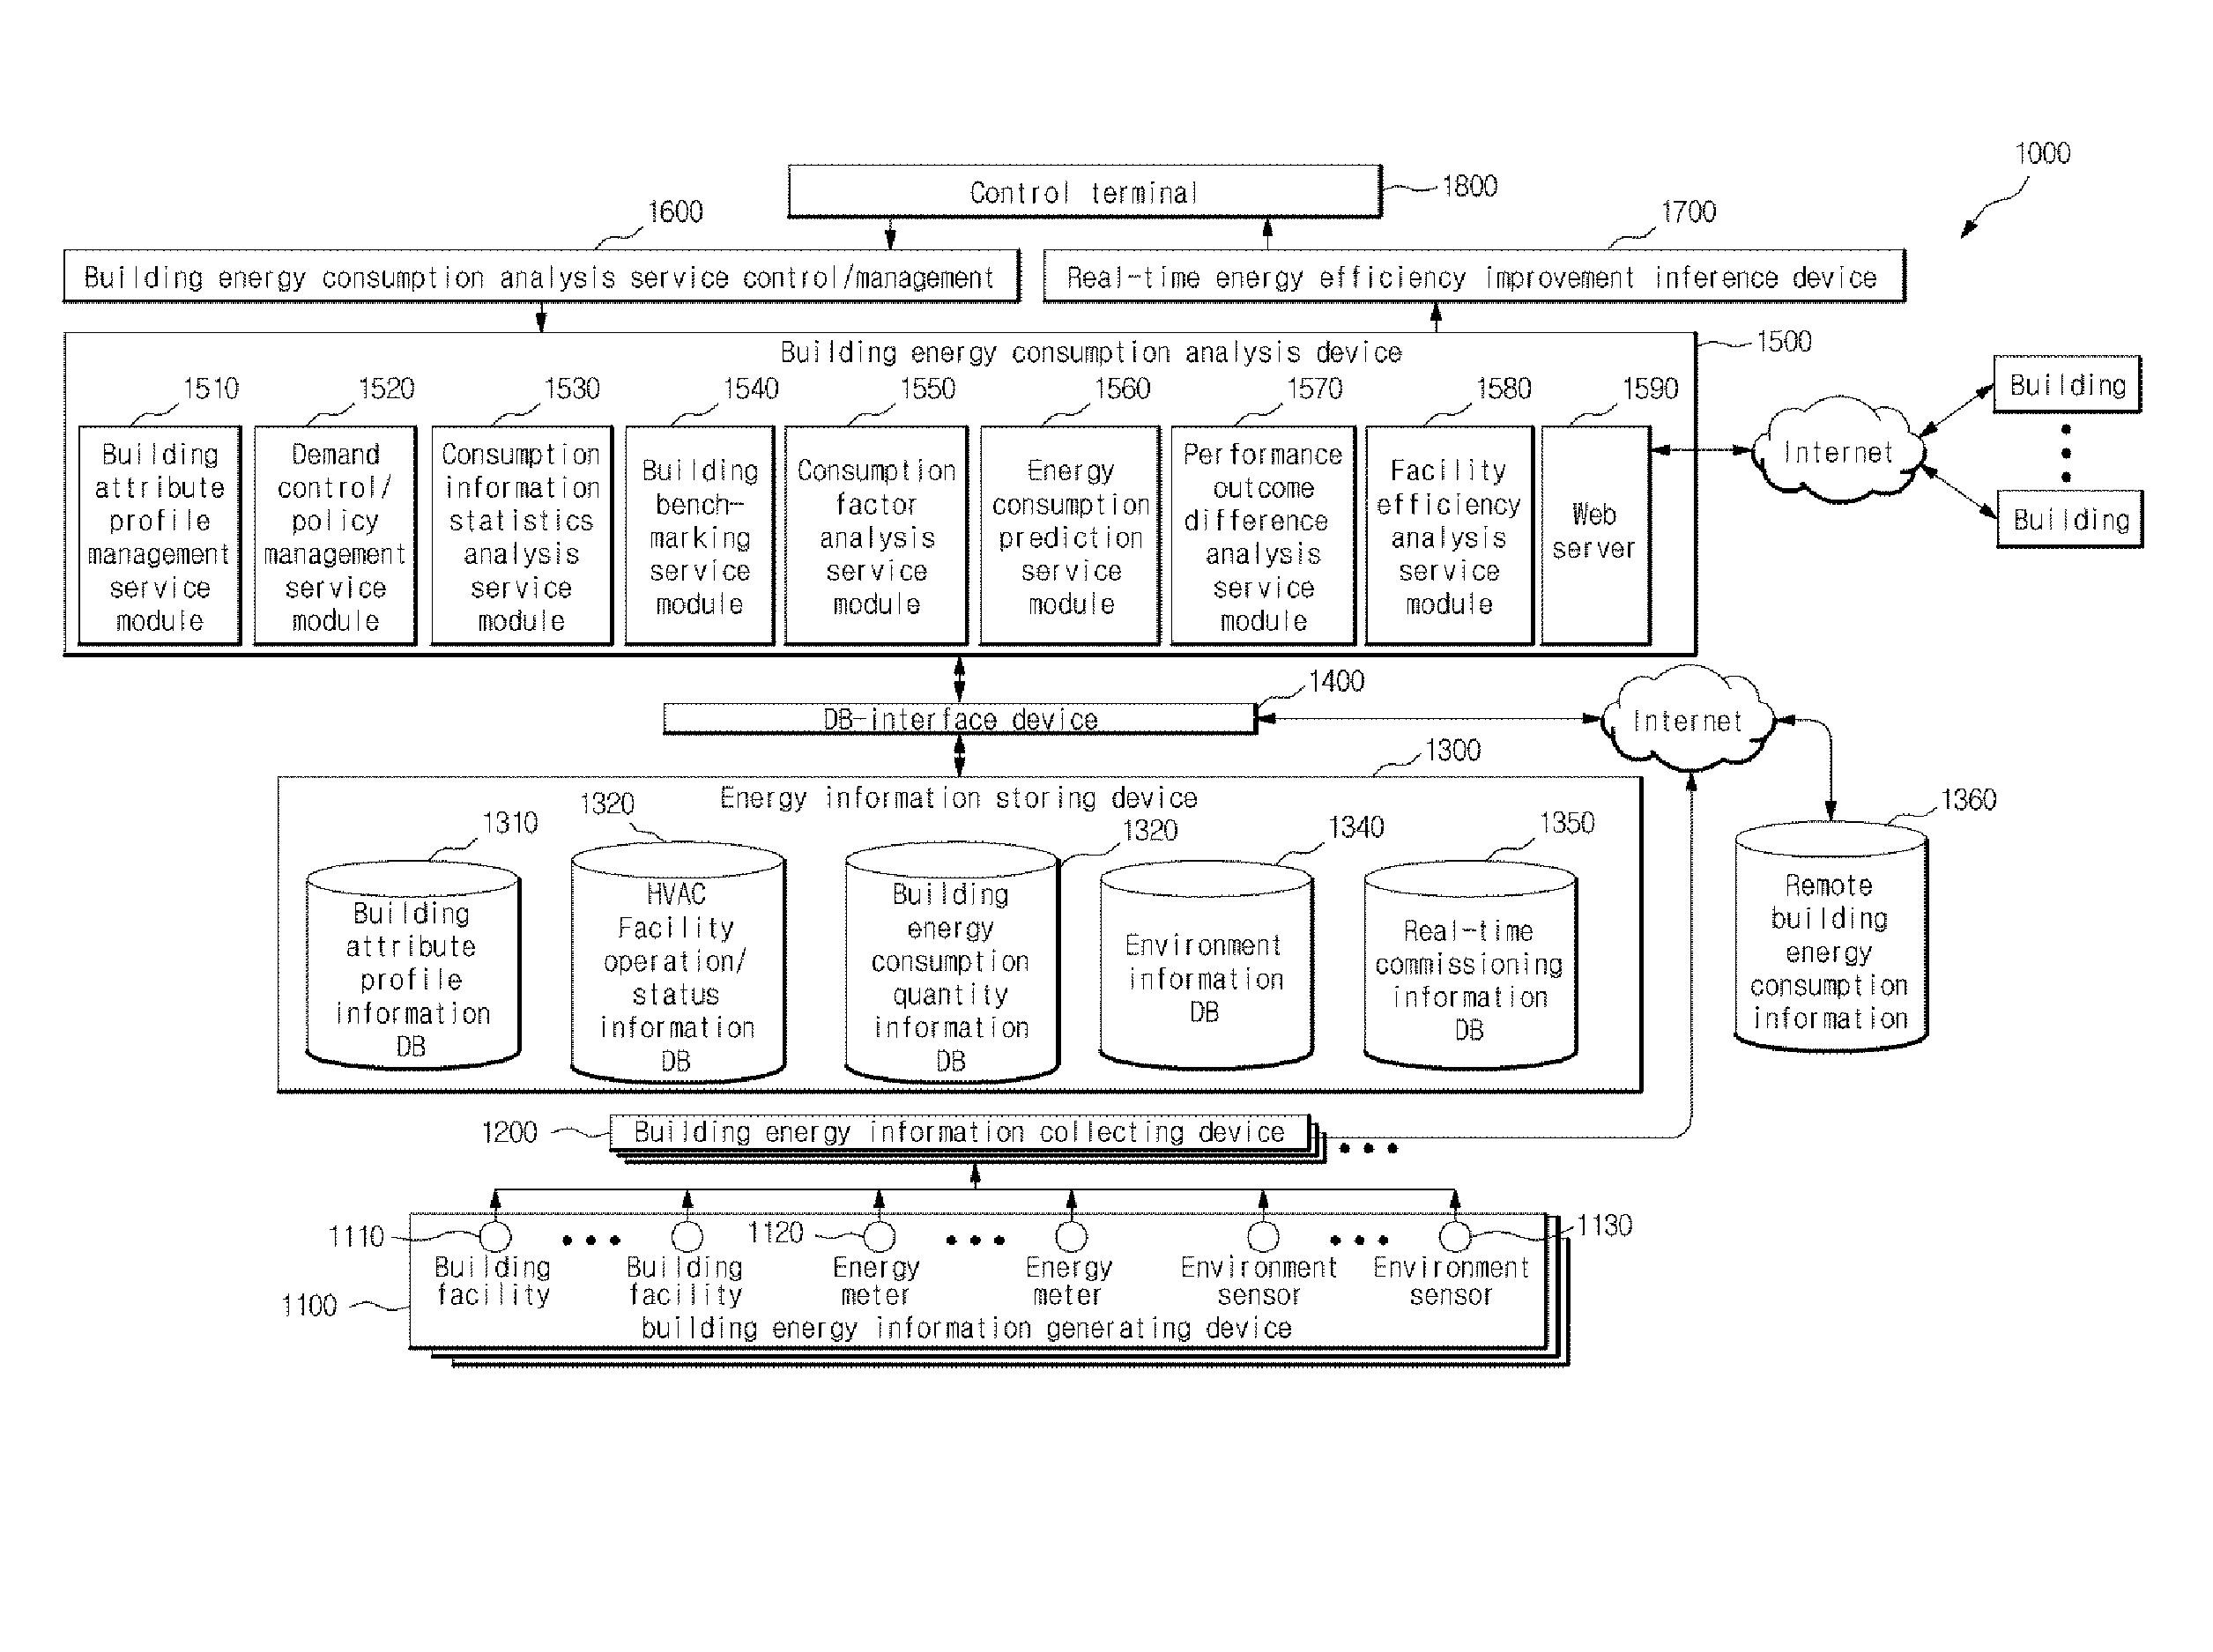 System for analyzing building energy consumption information